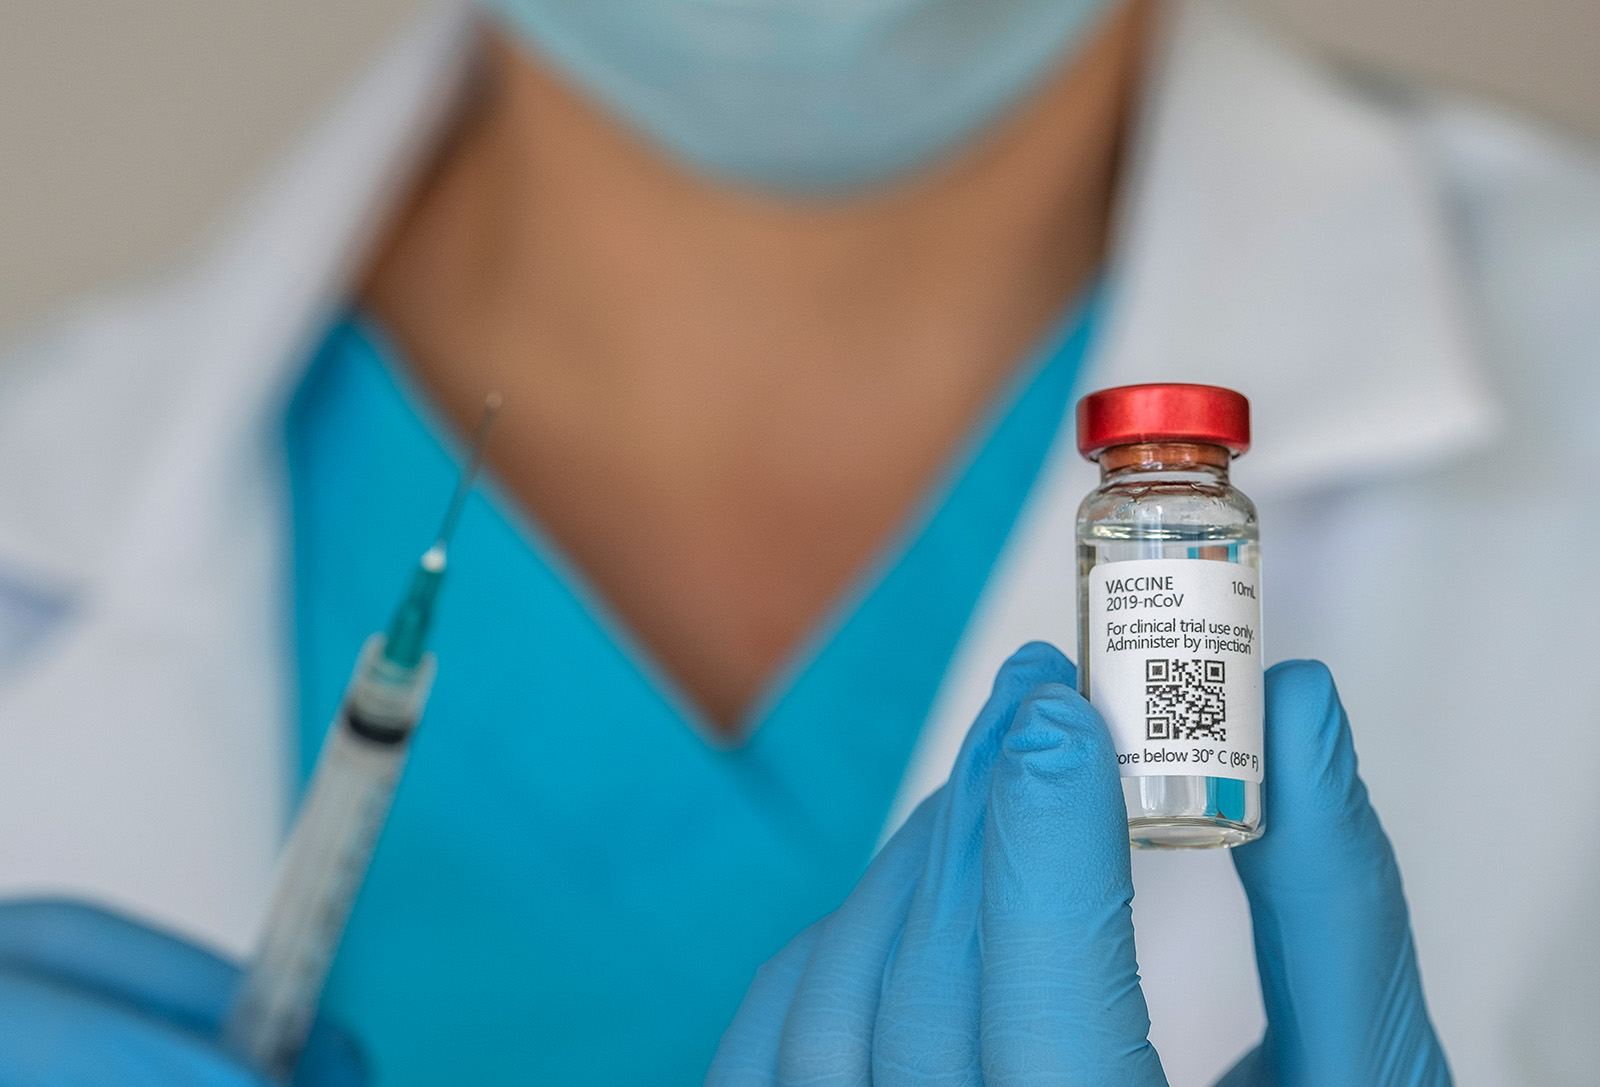 A photograph of a person holding a vaccine and a syringe